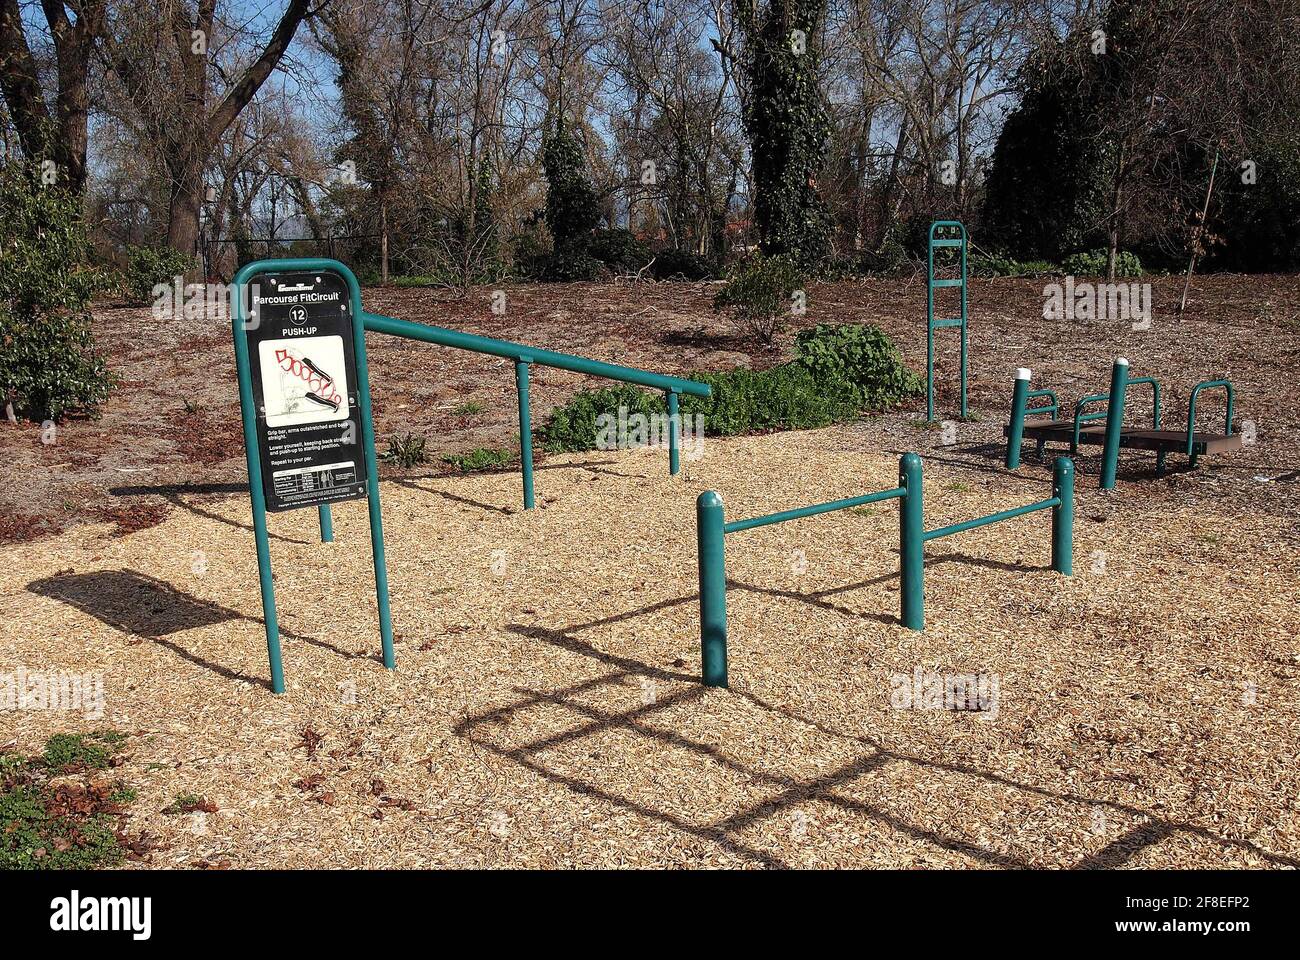 outside, exercise area in a public park in California Stock Photo